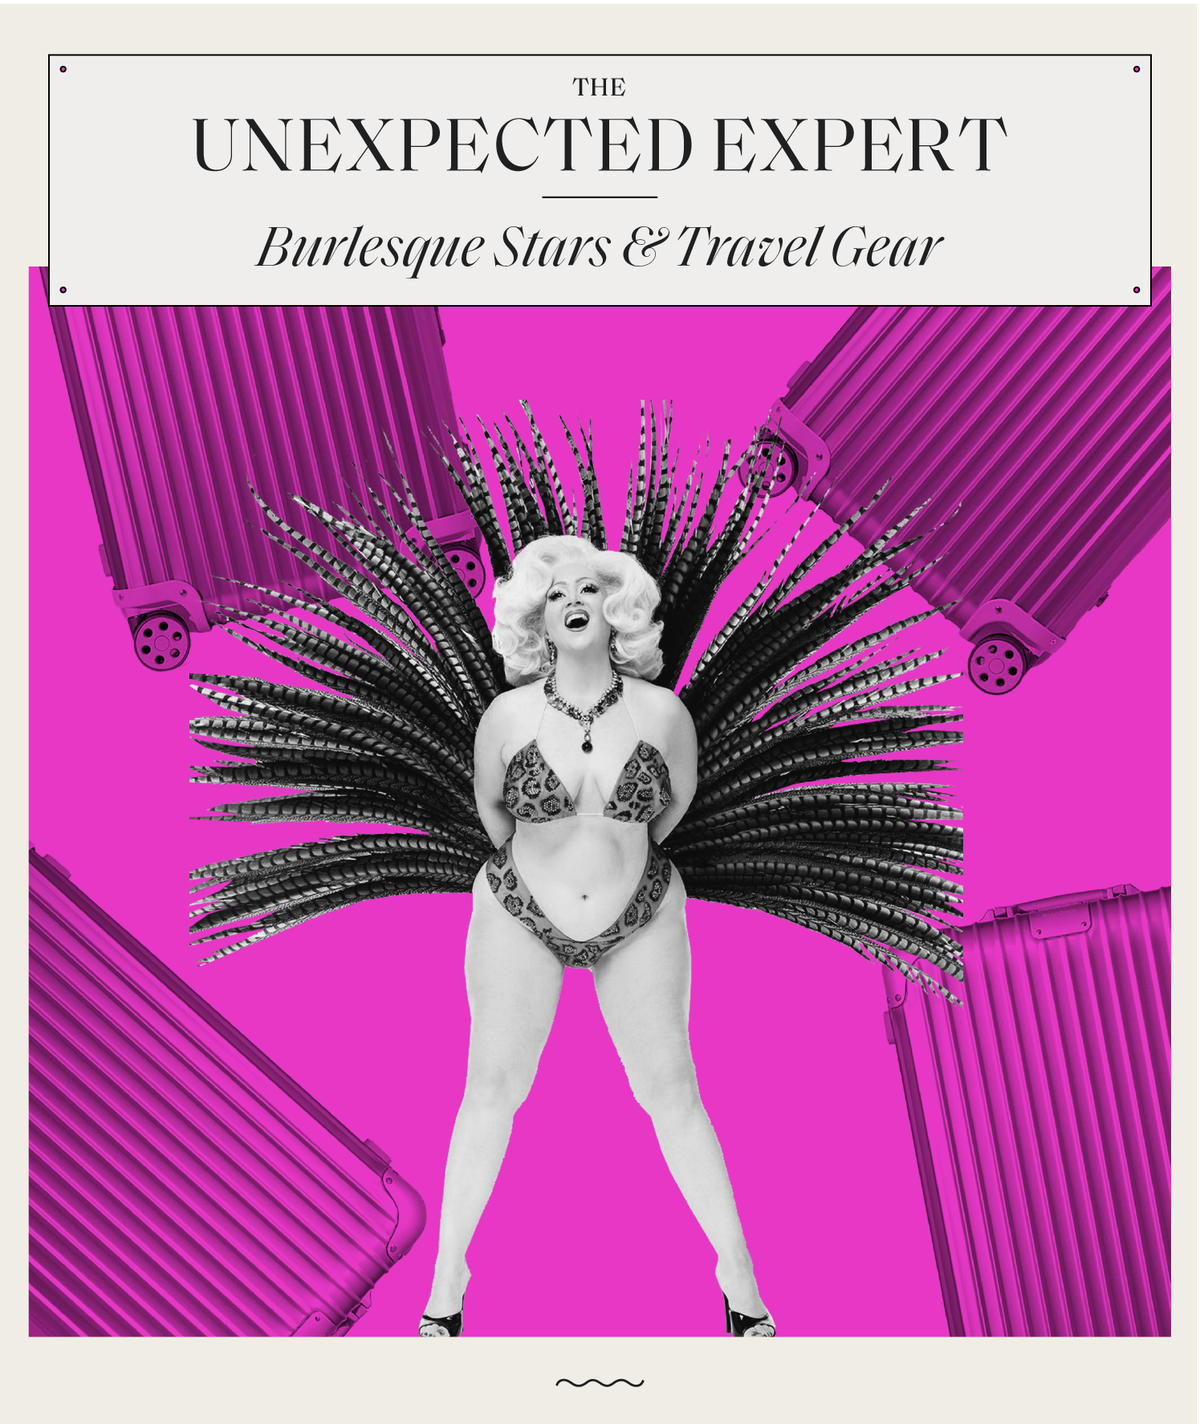 elle unexpected expert, burlesque stars and travel gear